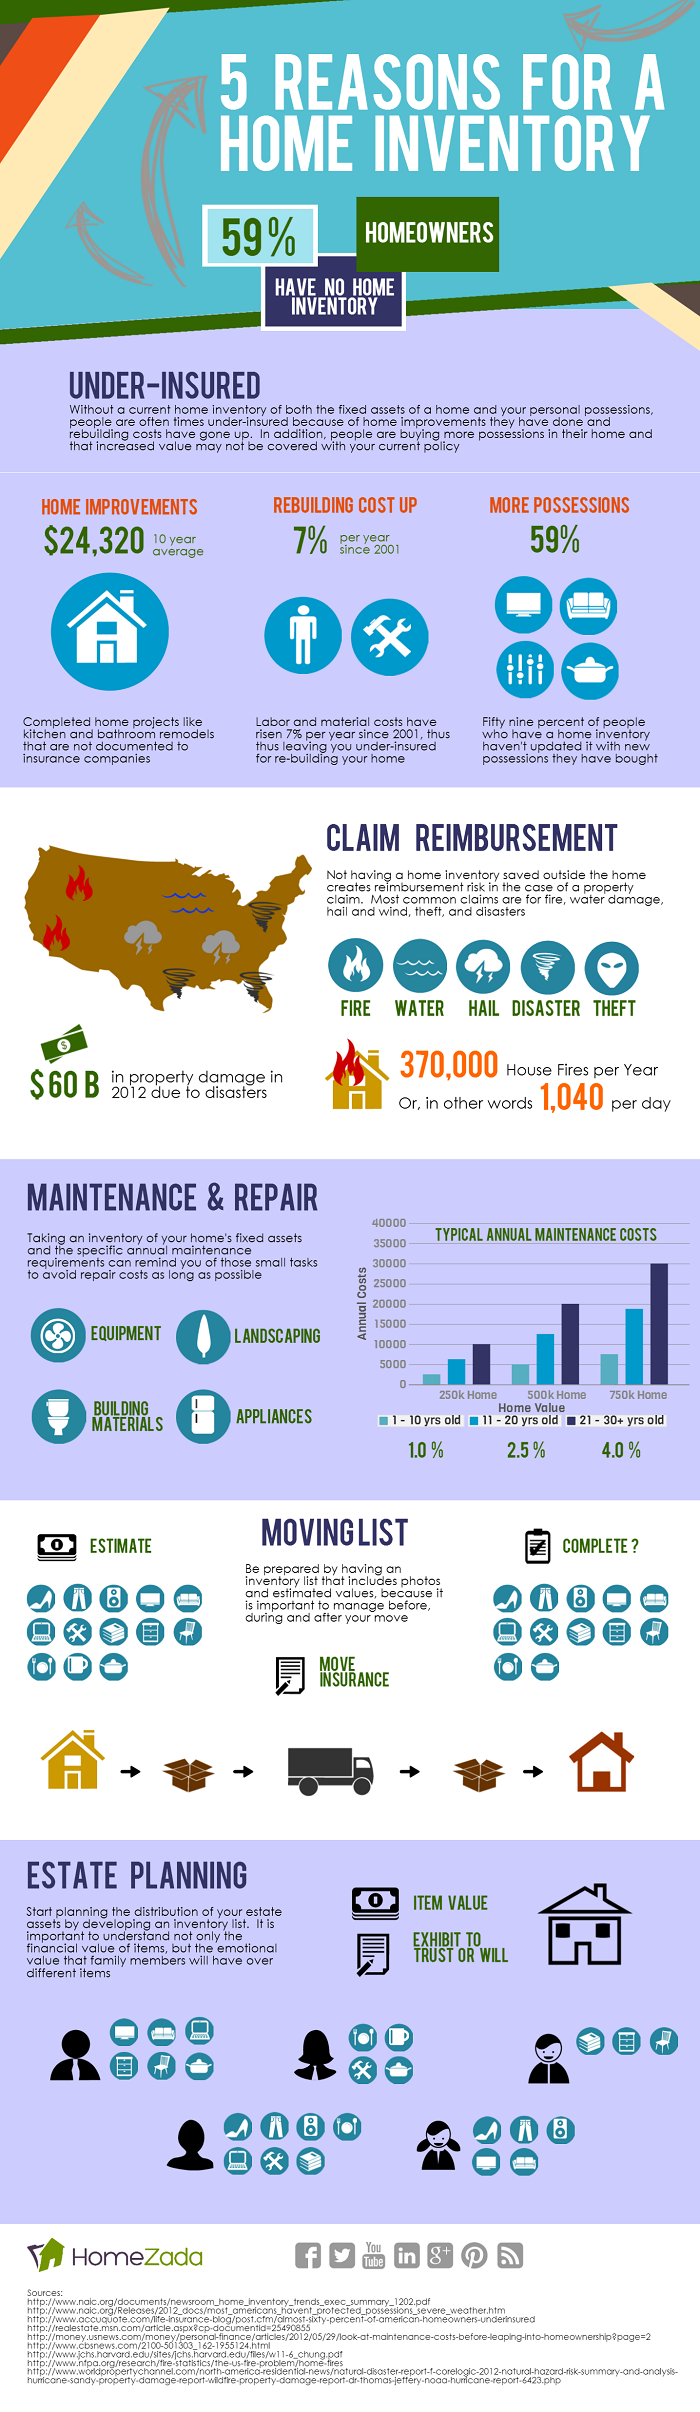 Five Reasons for a Home Inventory infographic